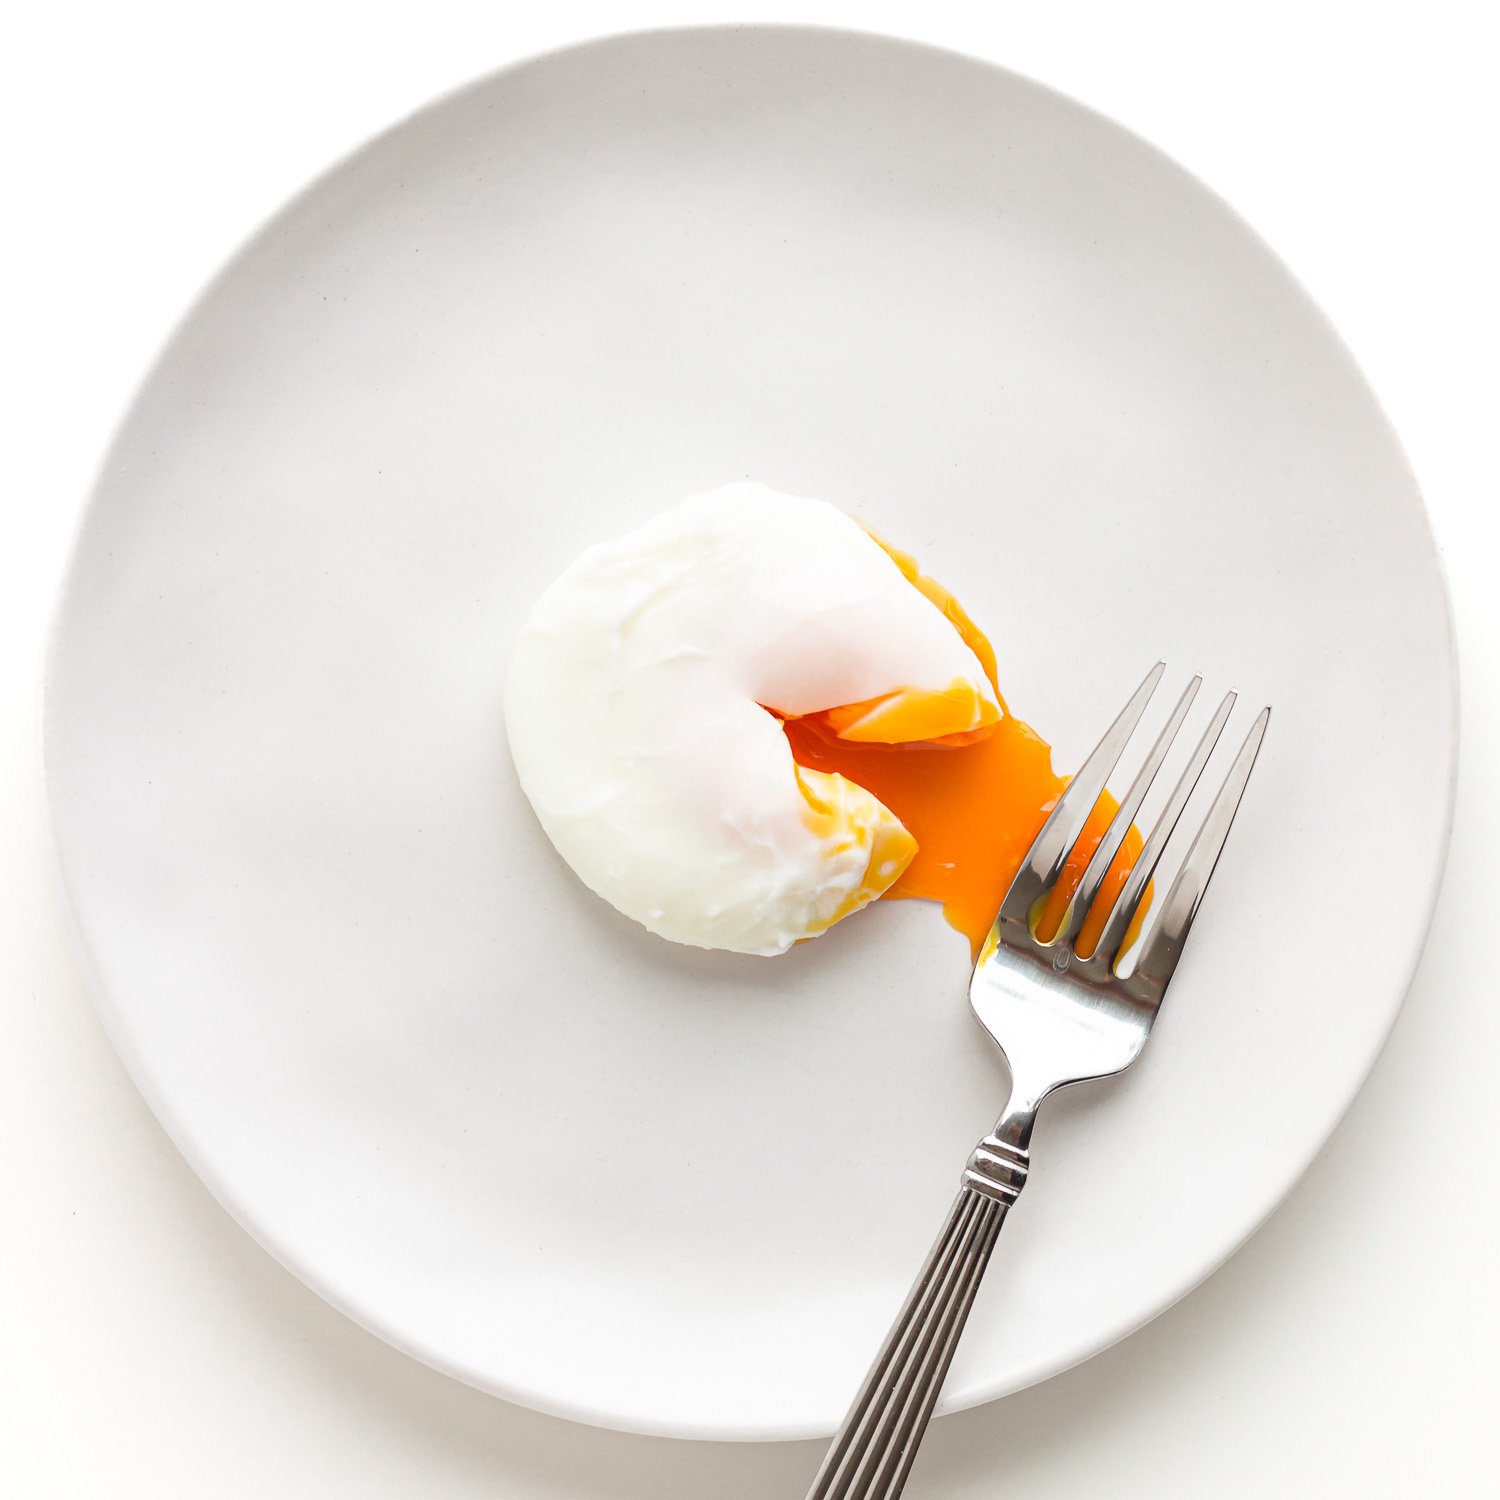 A poached egg on a white plate with a fork that has cut in to release some of the oozy yolk.